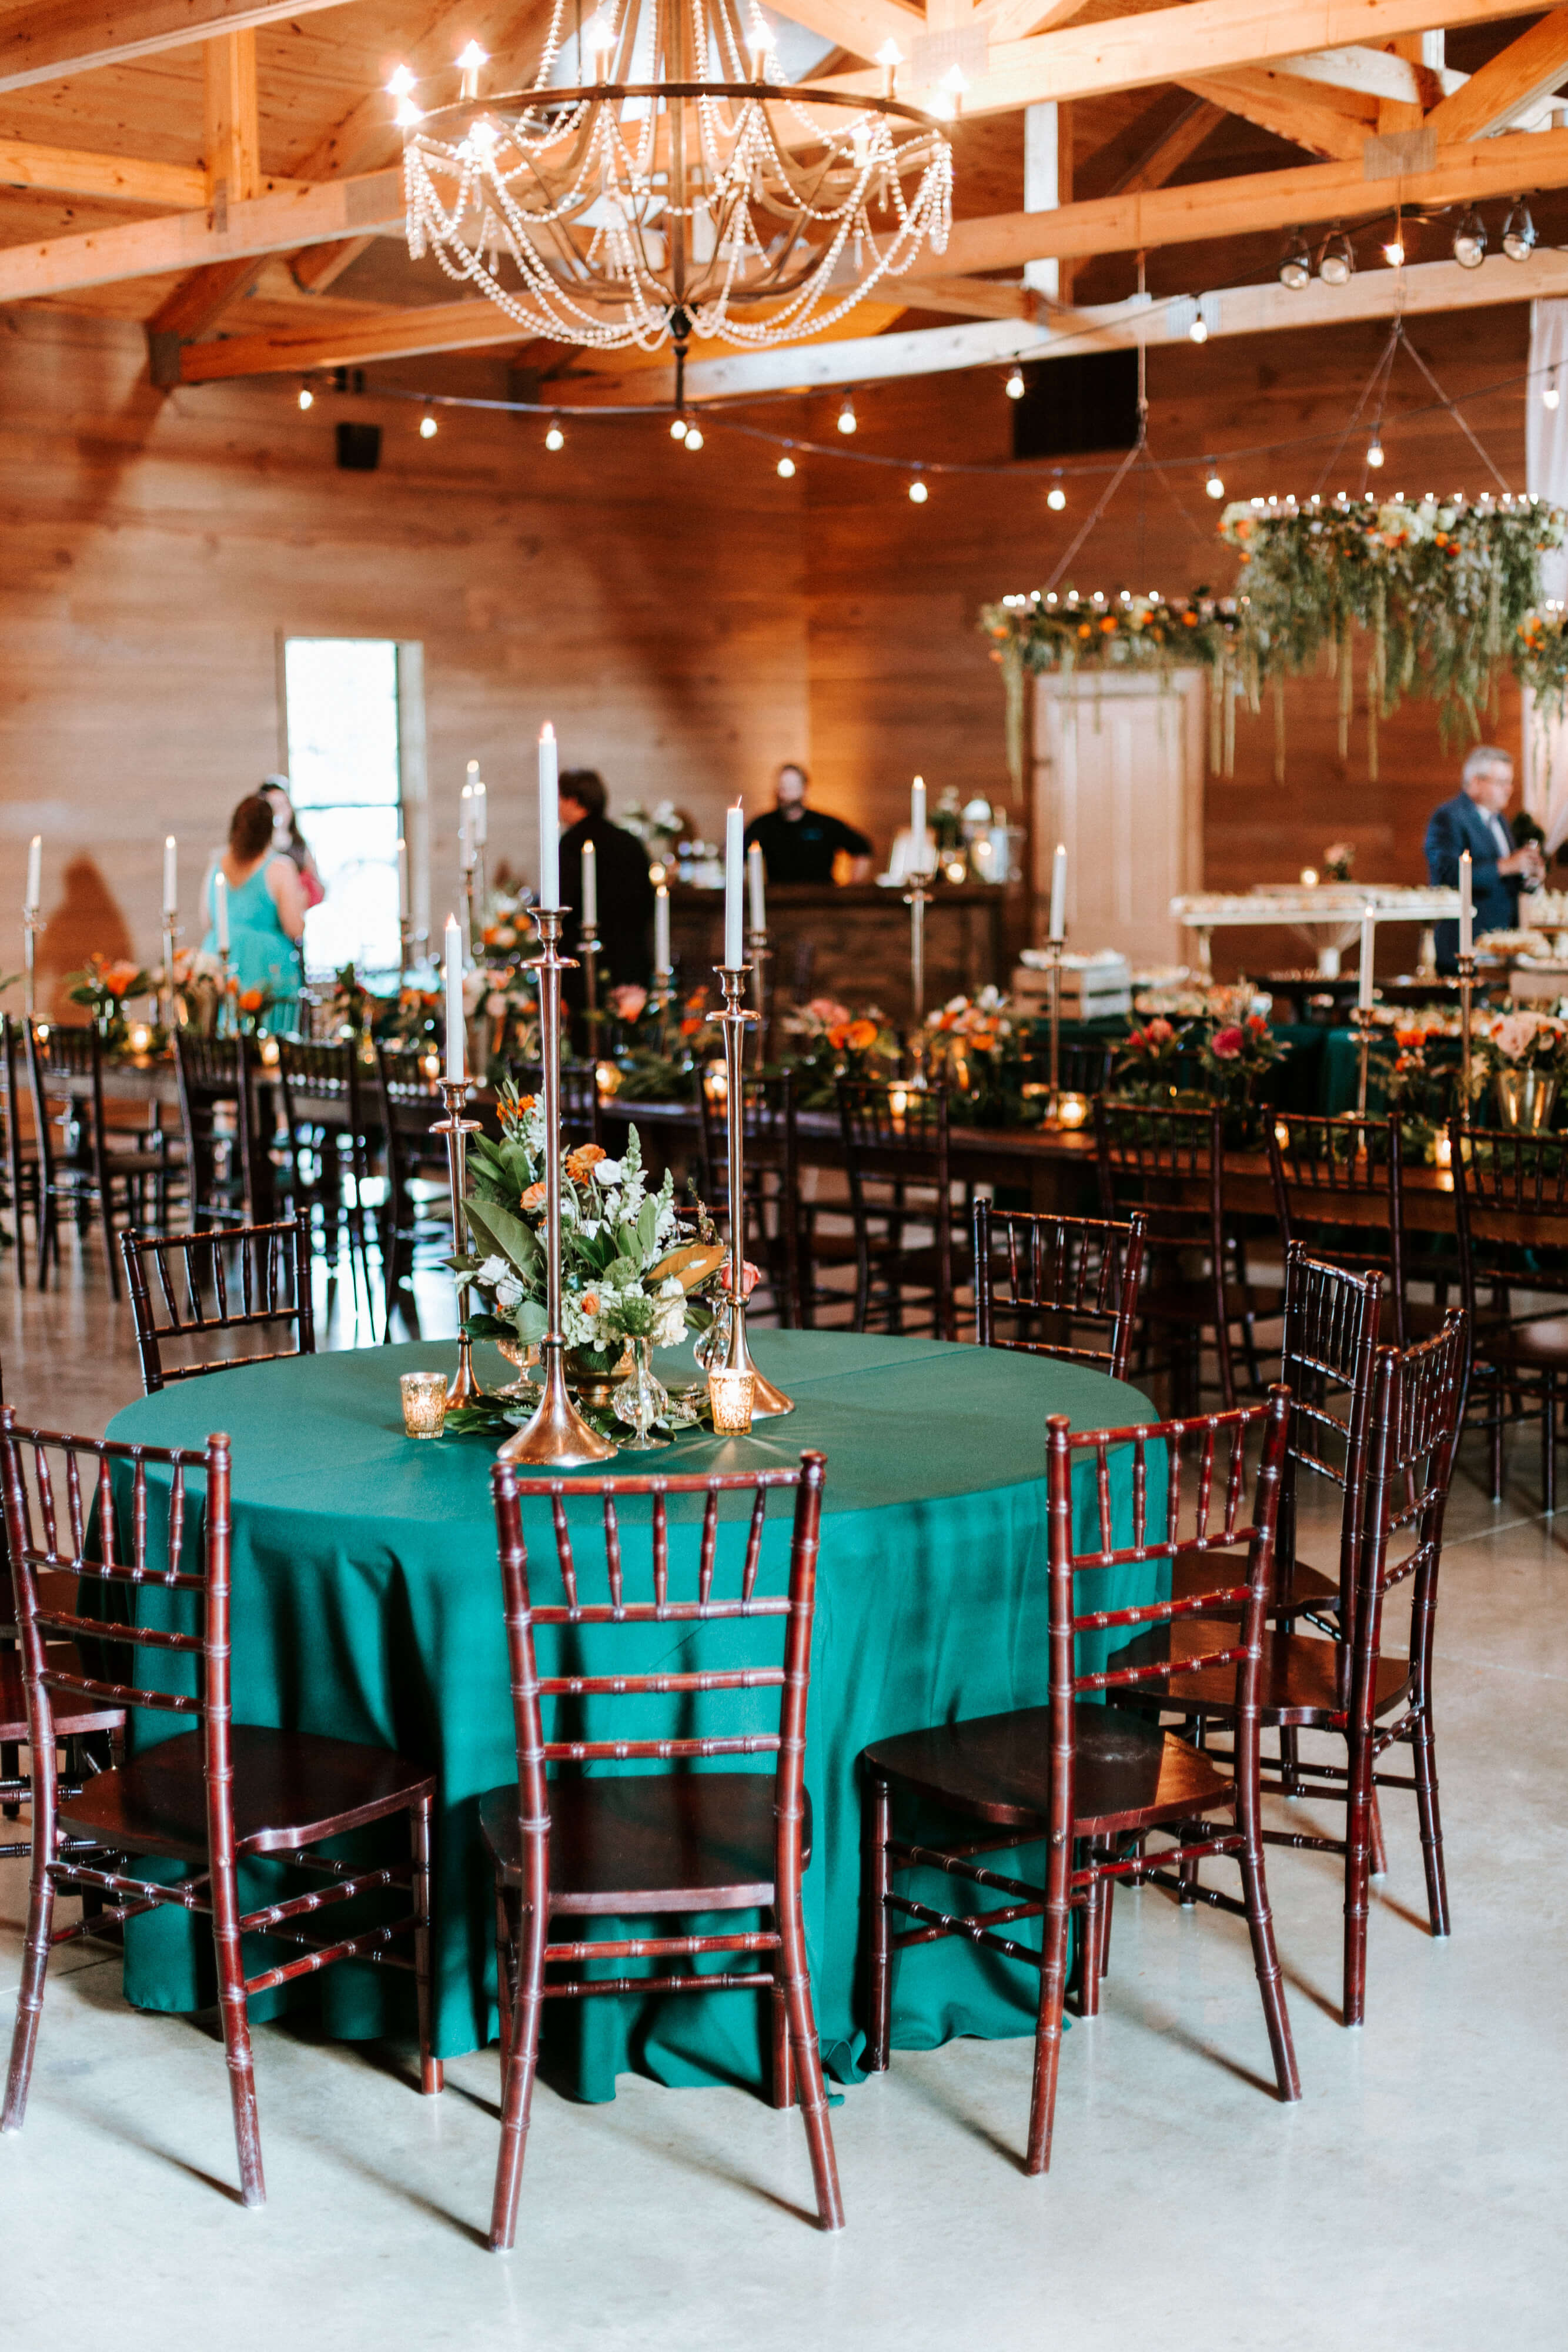 The entire room at The Barn At Shady Lane embodies exactly what a fall wedding is thought to be.